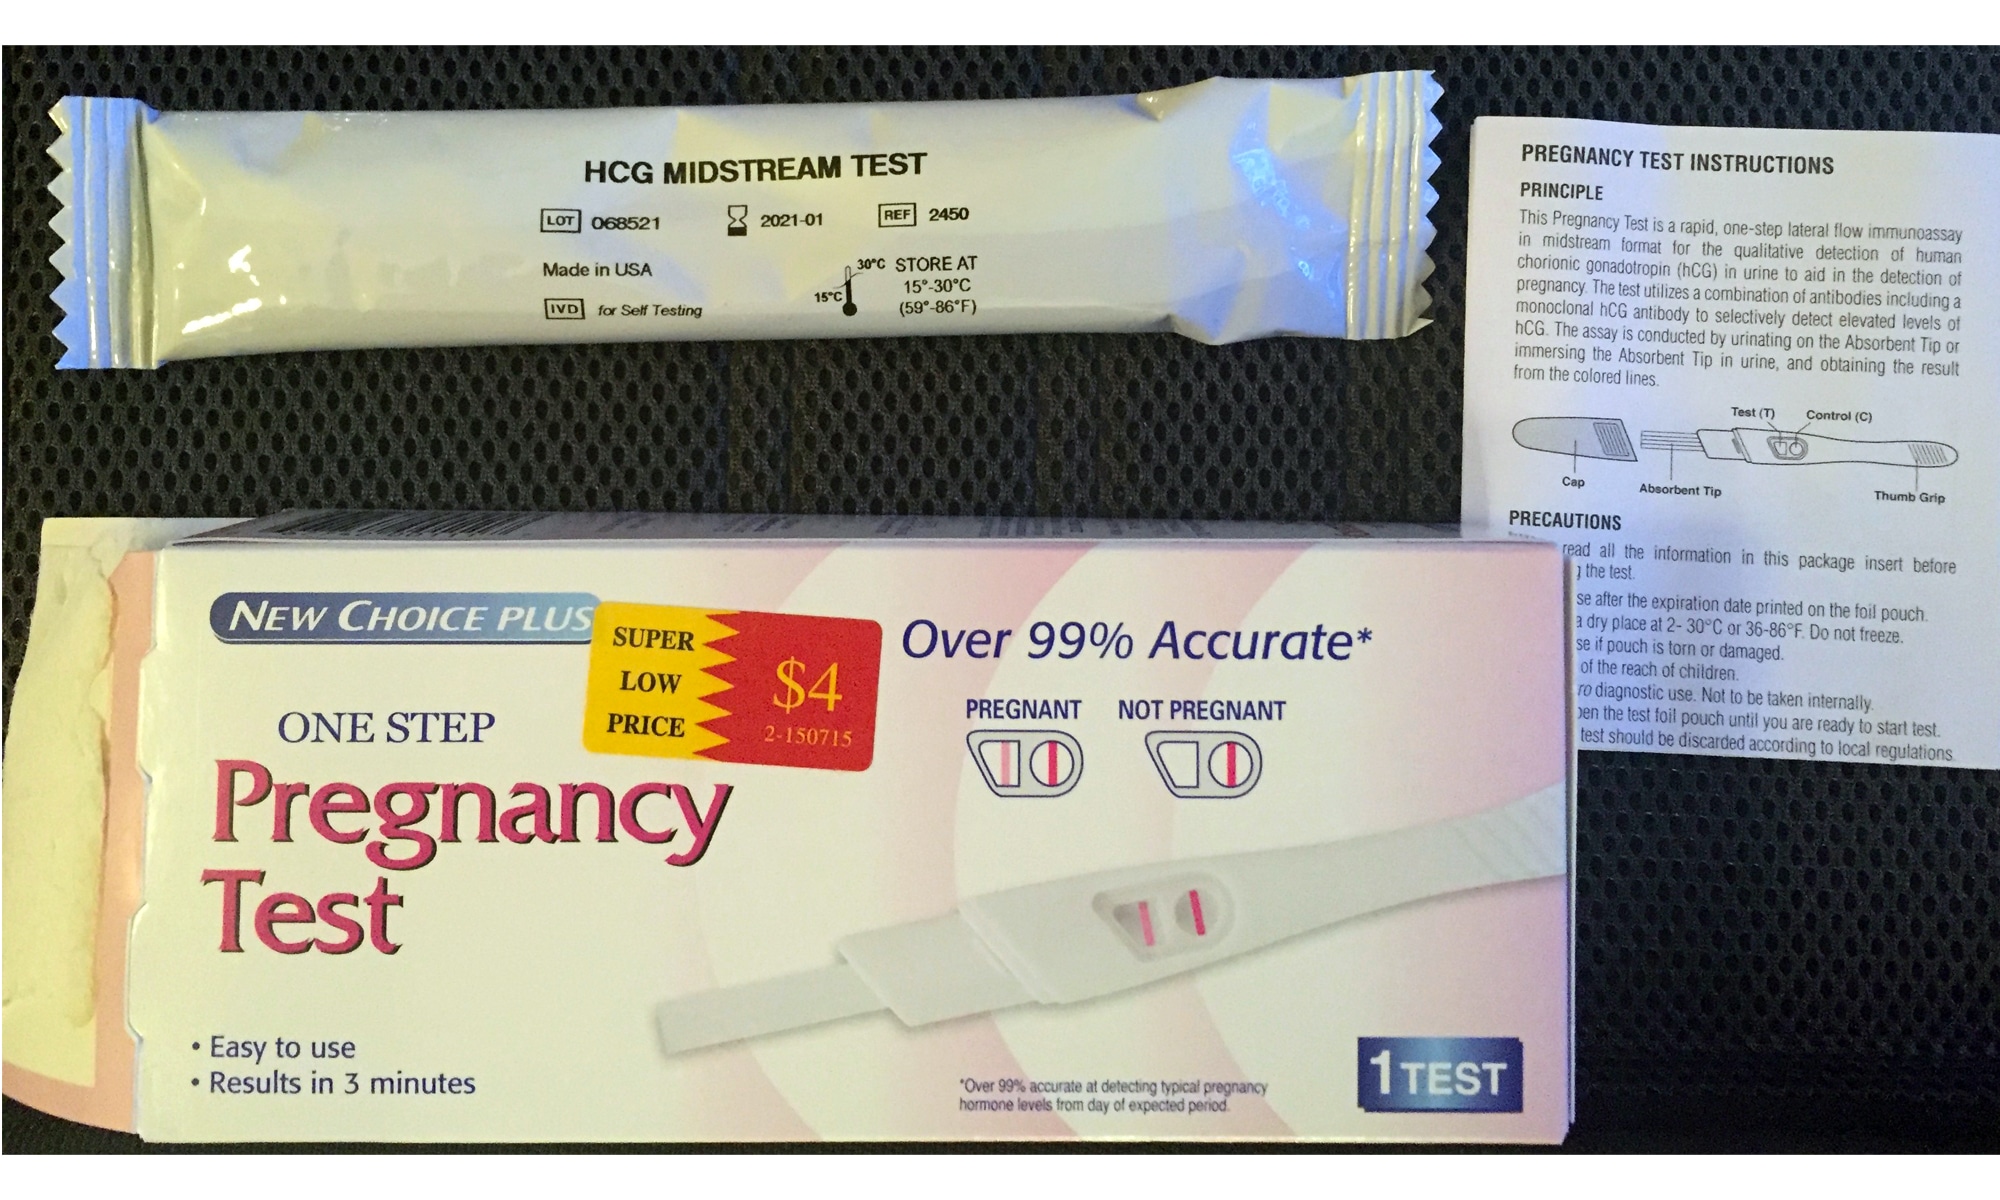 What Do I Get with the New Choice Plus One Step Pregnancy Test?